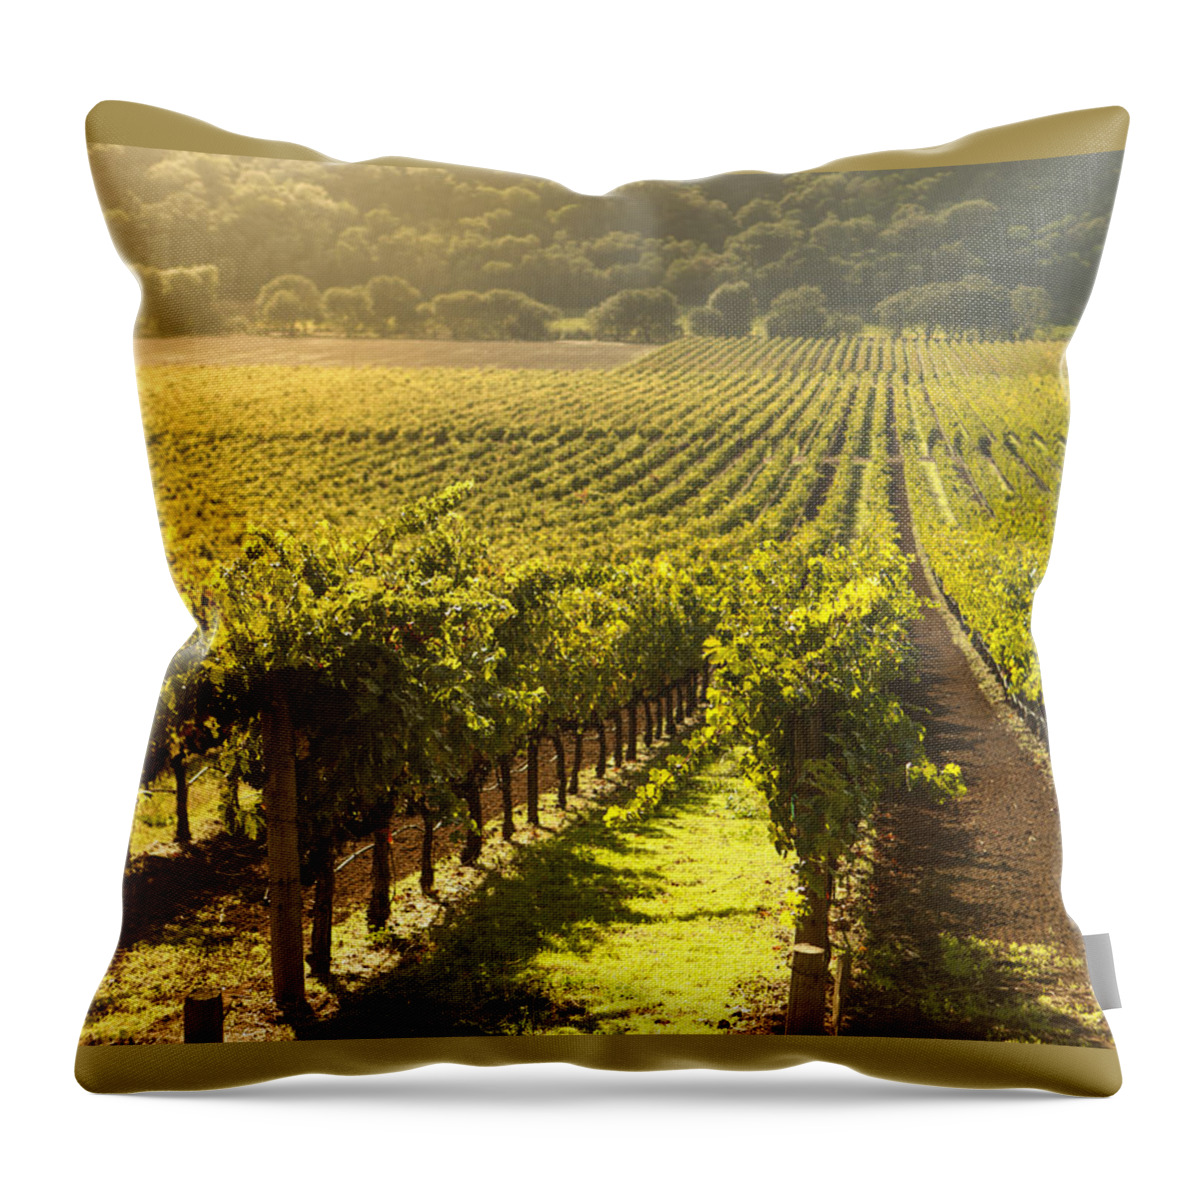 Vineyard Throw Pillow featuring the photograph Vineyard in Napa Valley by Diane Diederich